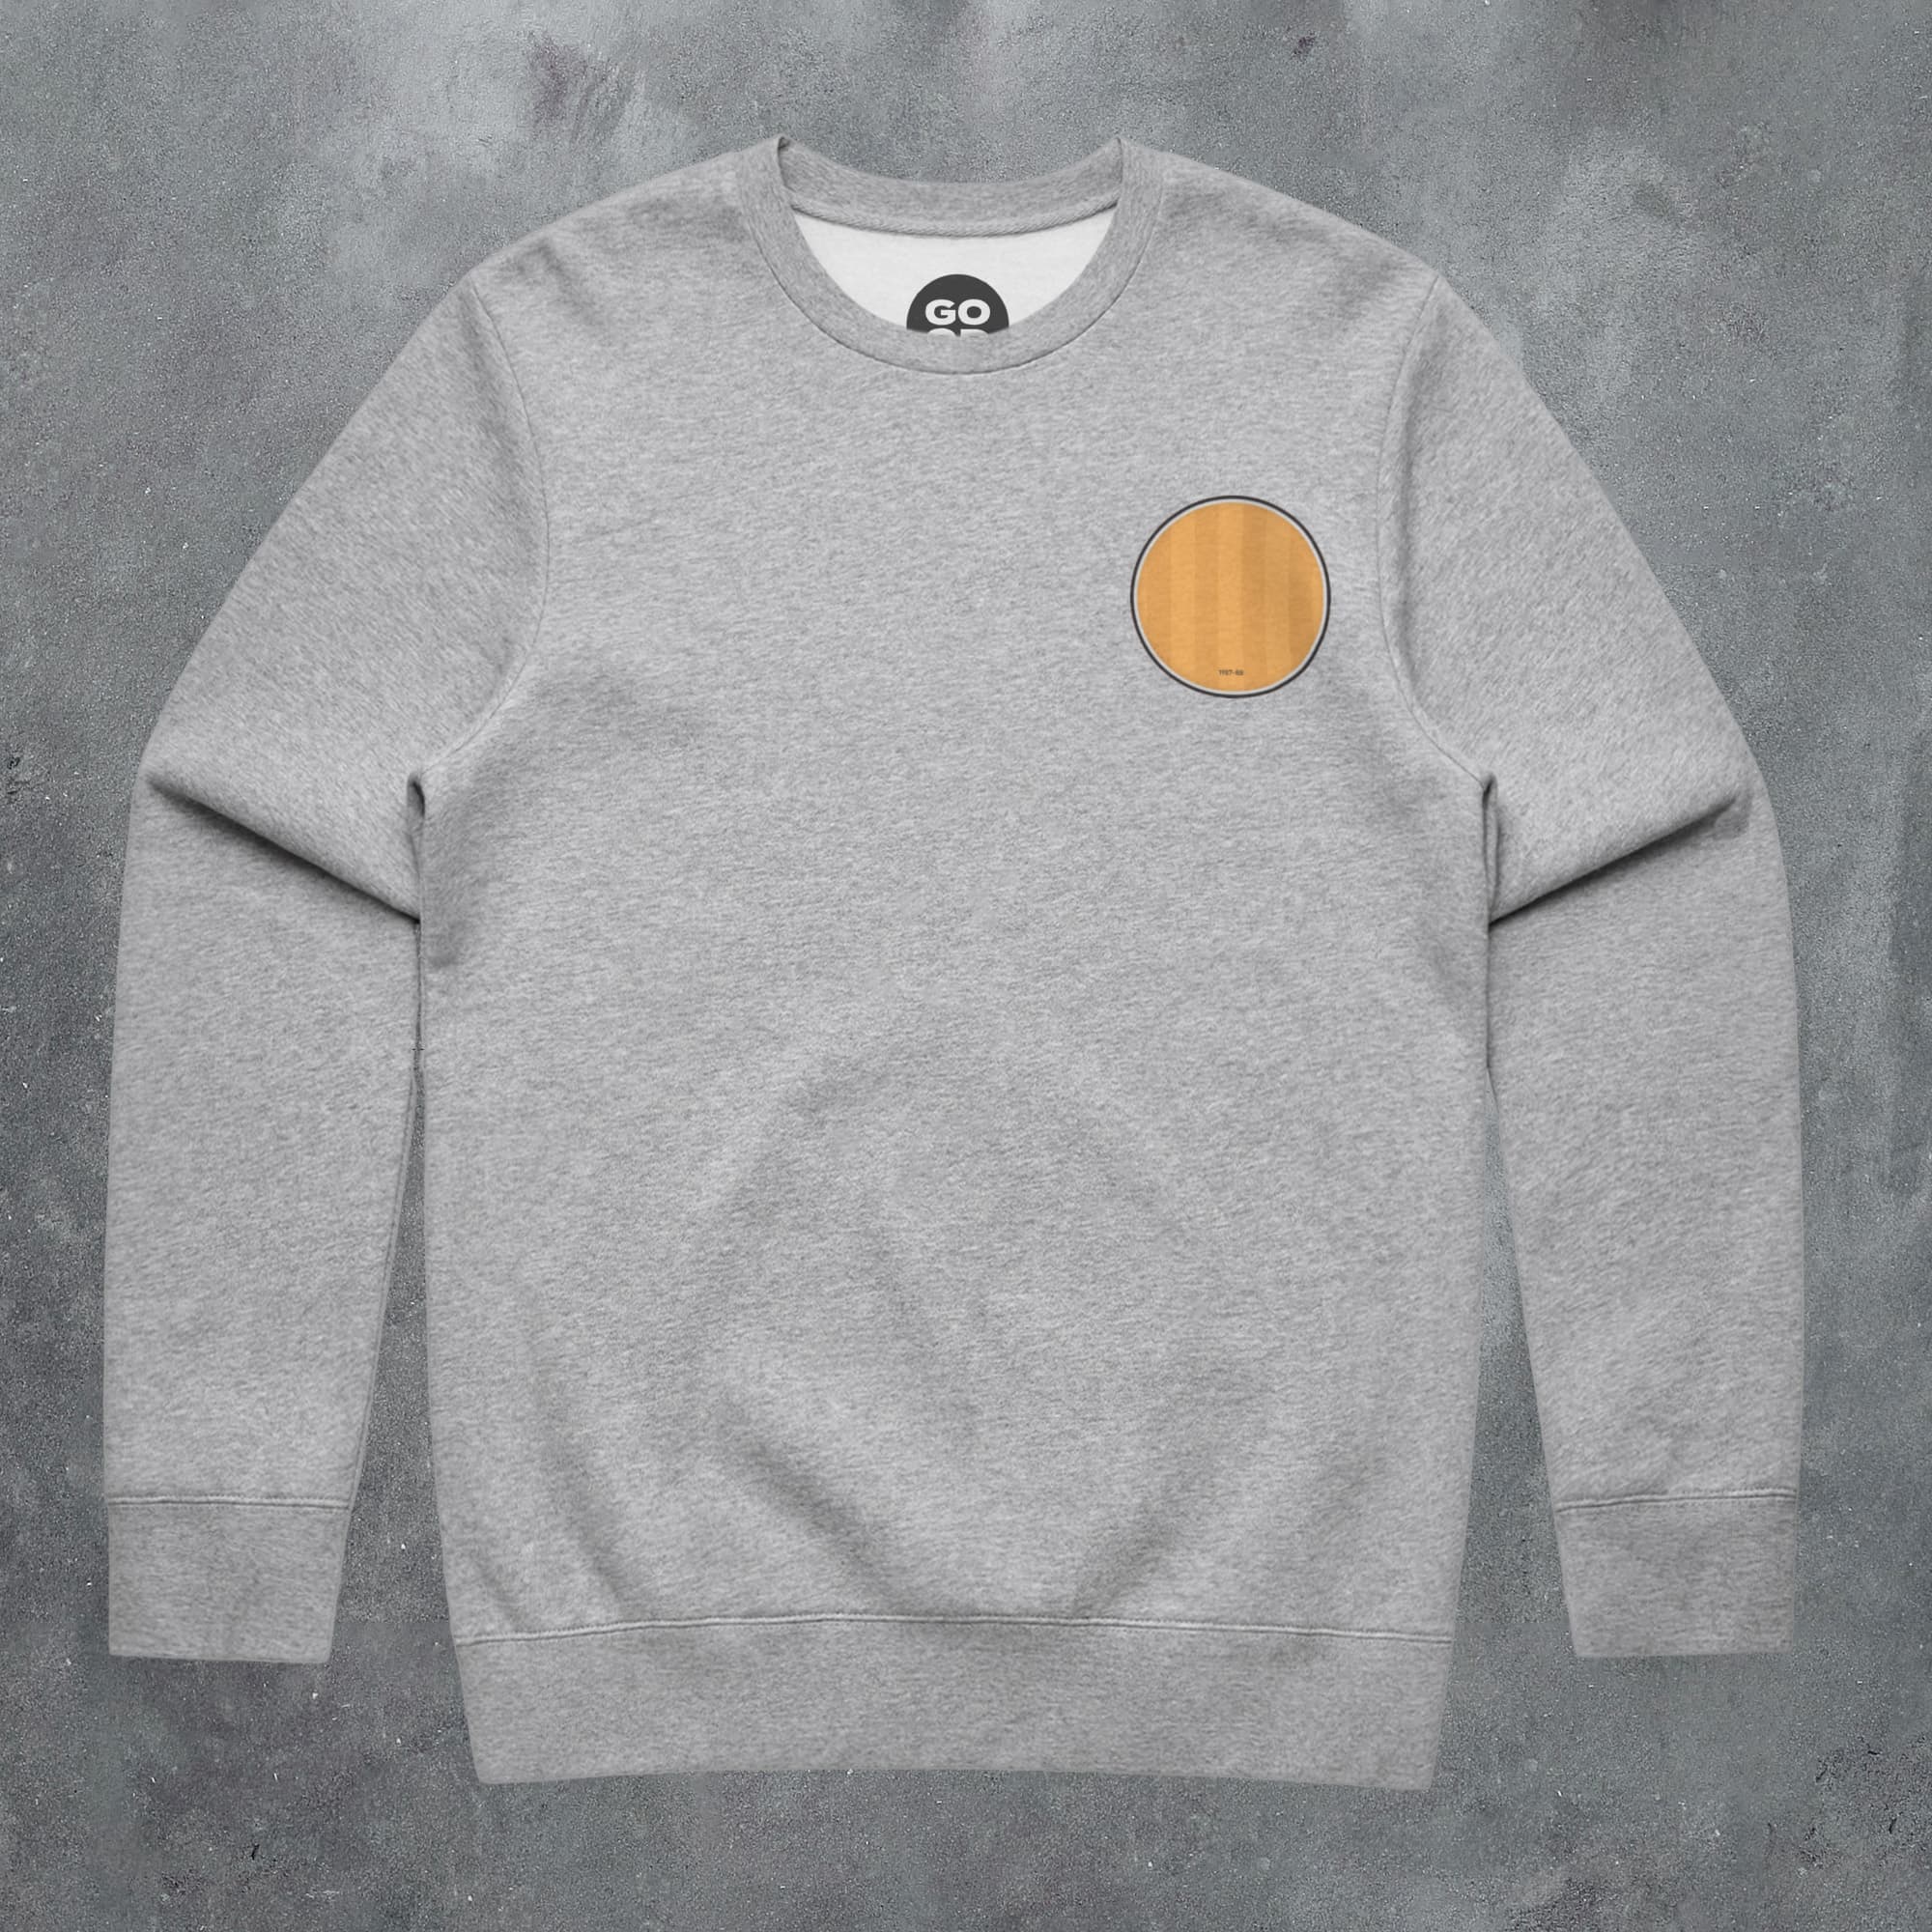 a grey sweatshirt with an orange patch on the chest